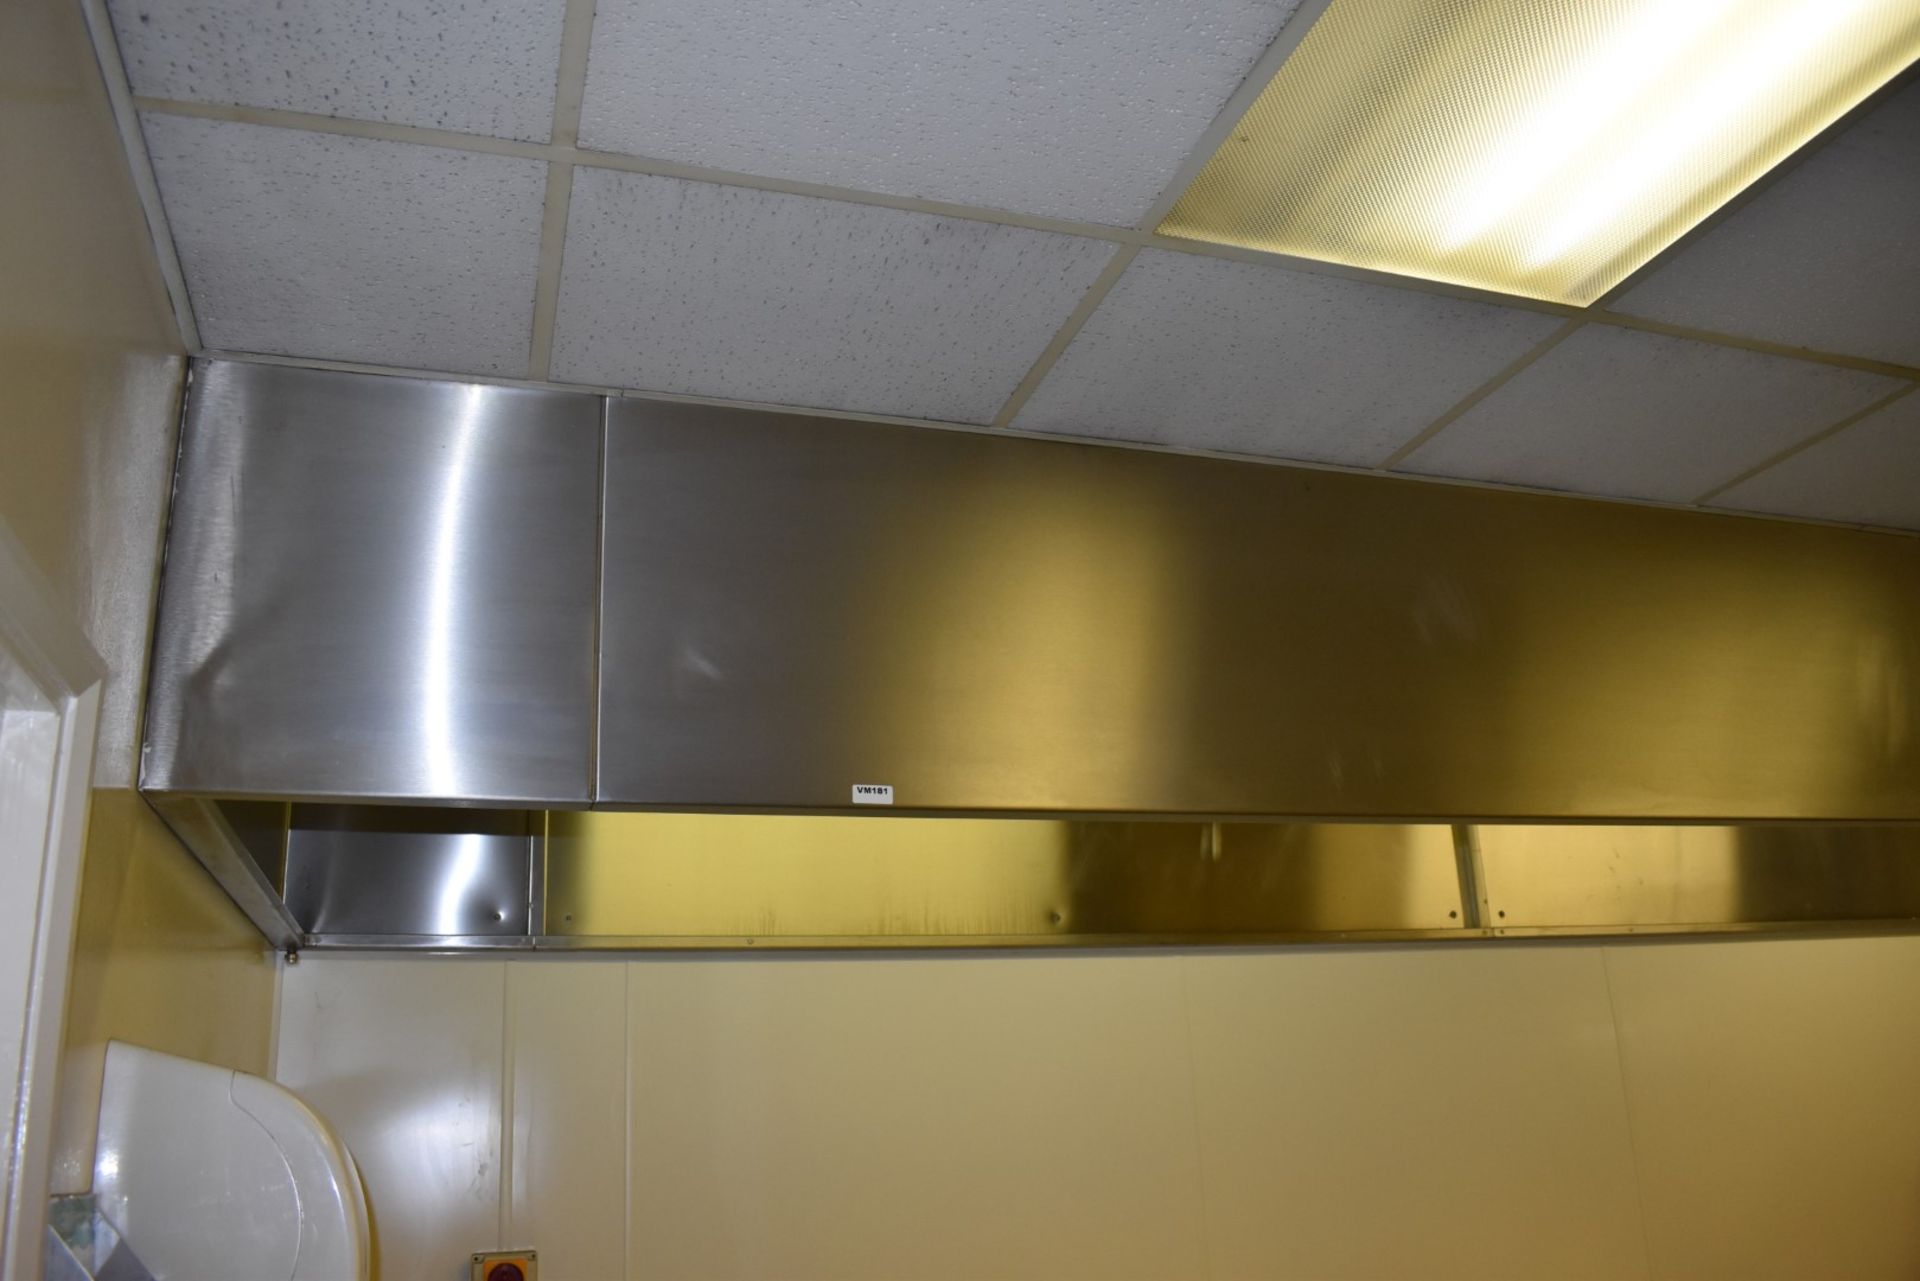 1 x Commerical Kitchen Ceiling Mounted Extractor Hood - Stainless Steel - Breaks into Multiple Parts - Image 2 of 8